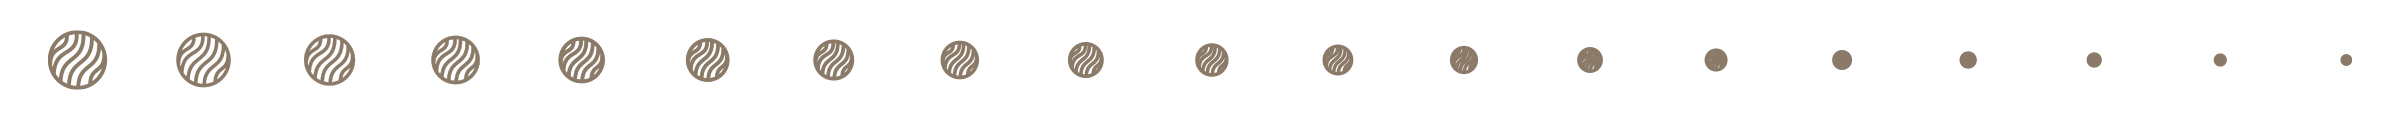 diagram of pebble texture from largest to smallest